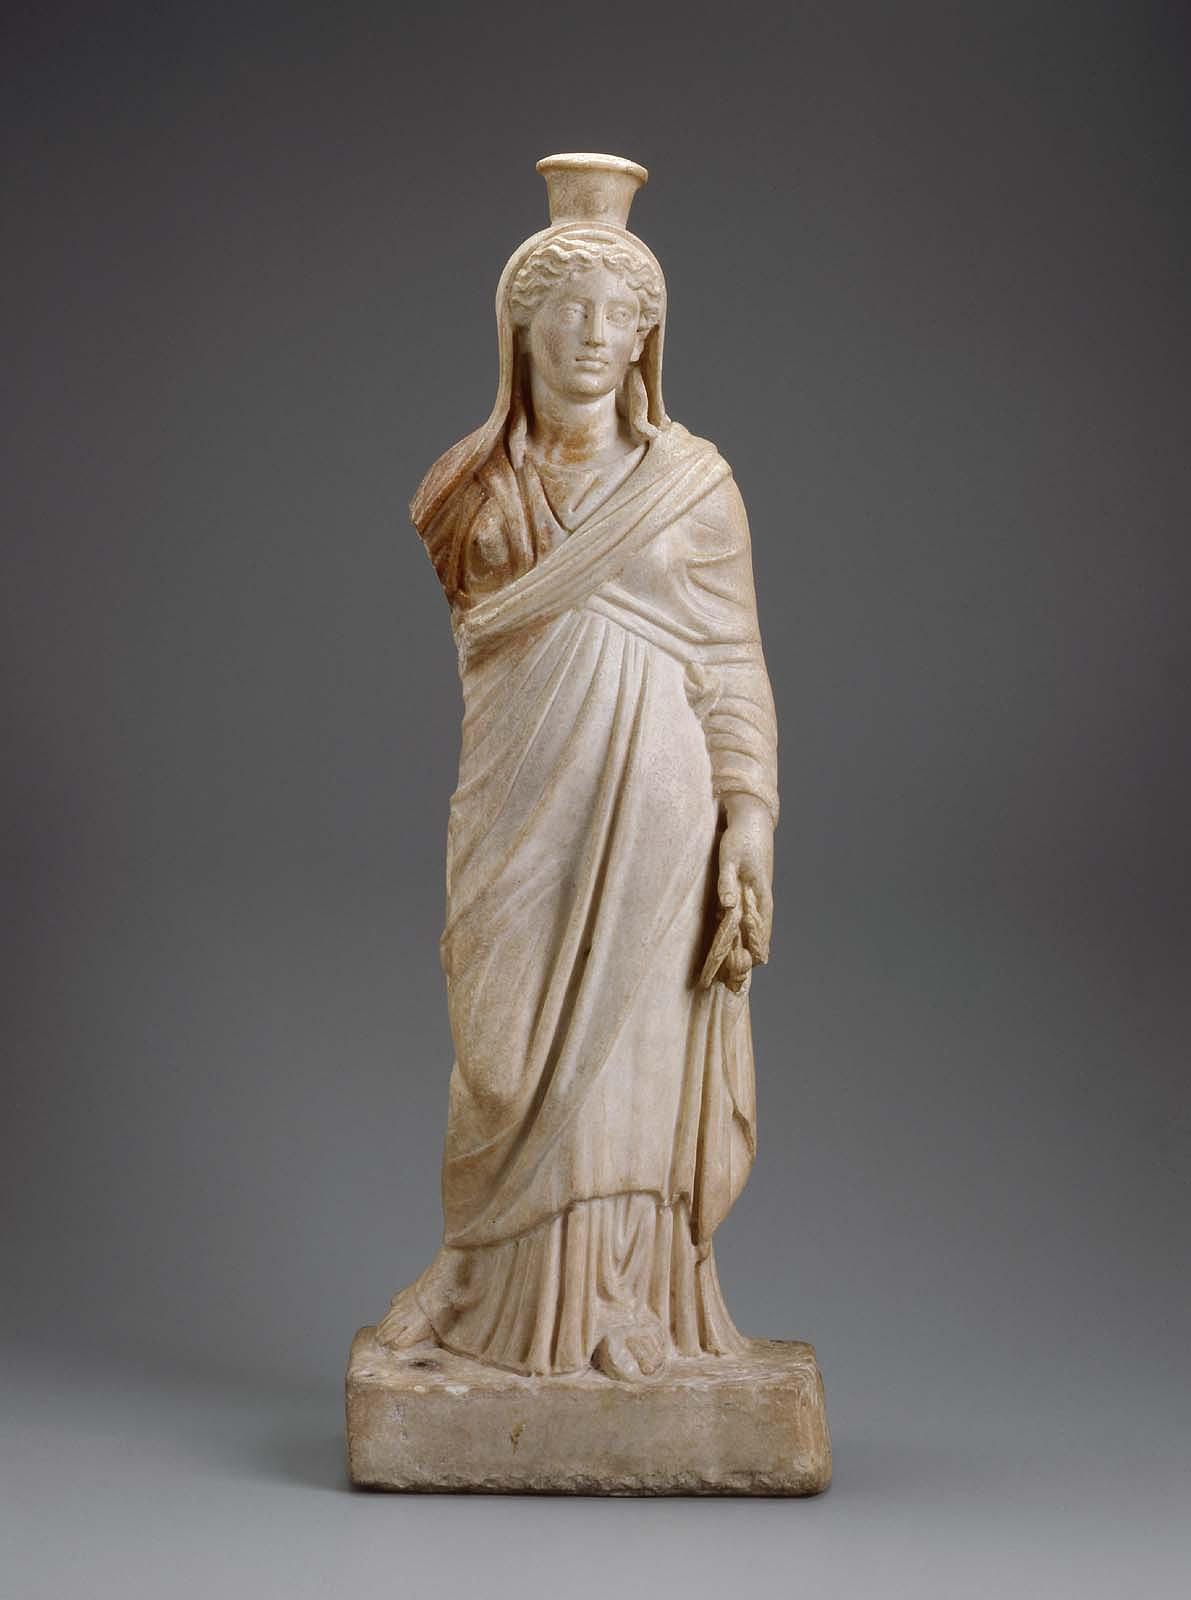 A marble statue of the goddess Demeter with small horns and a headdress with a sun disc.